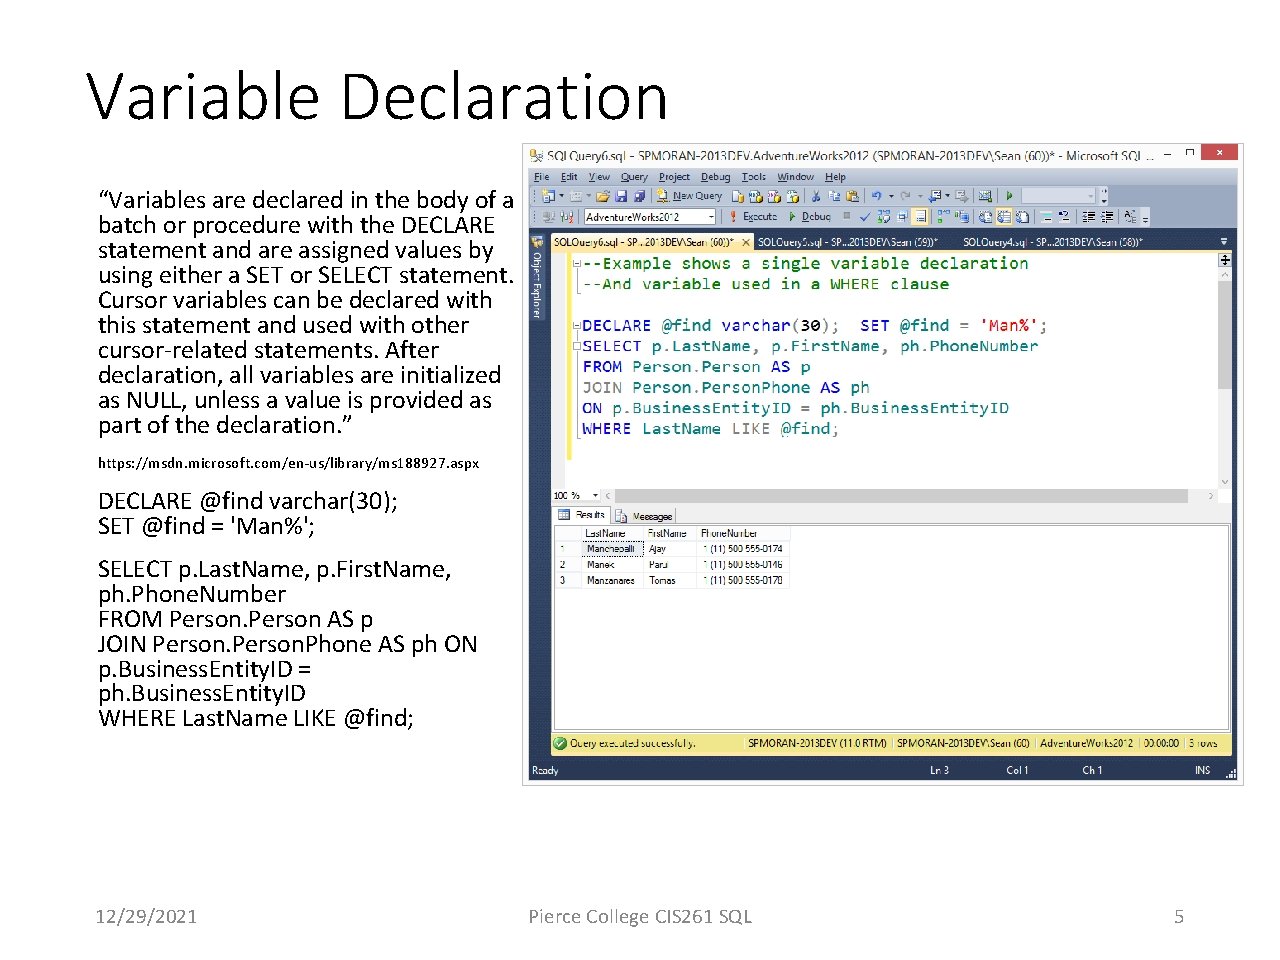 Variable Declaration “Variables are declared in the body of a batch or procedure with